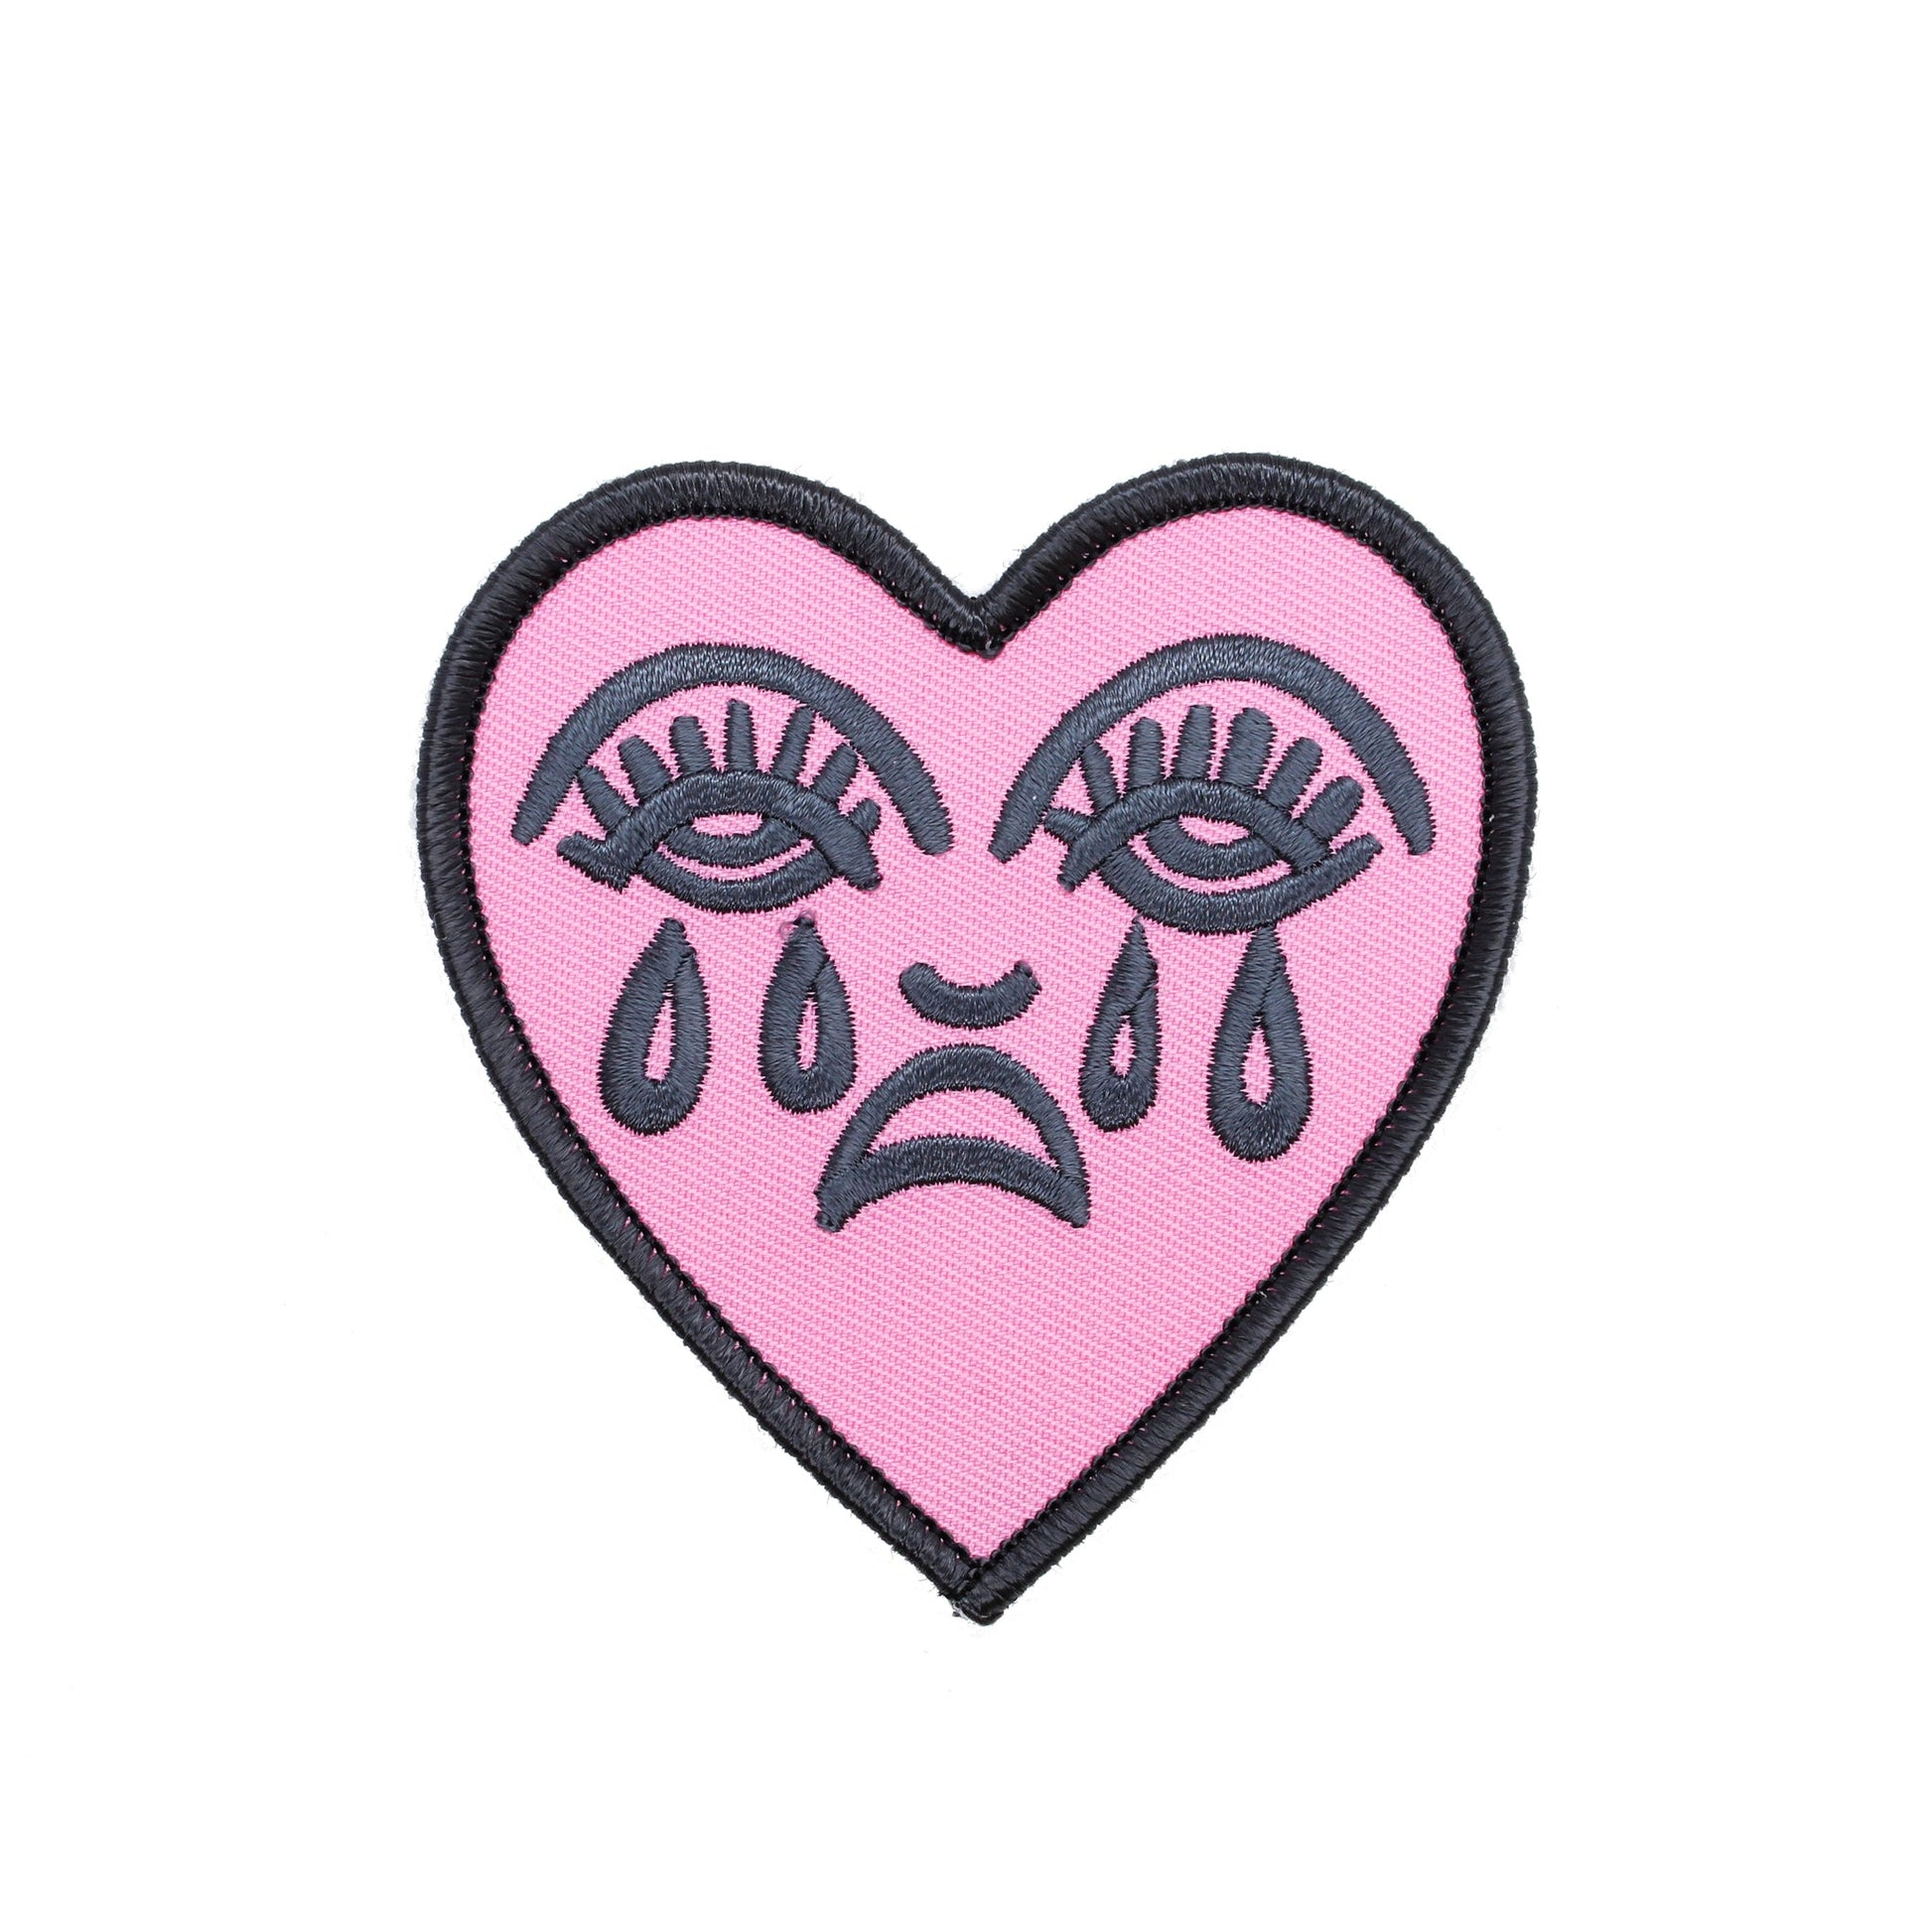 Crying Heart Embroidered Patch - Pink